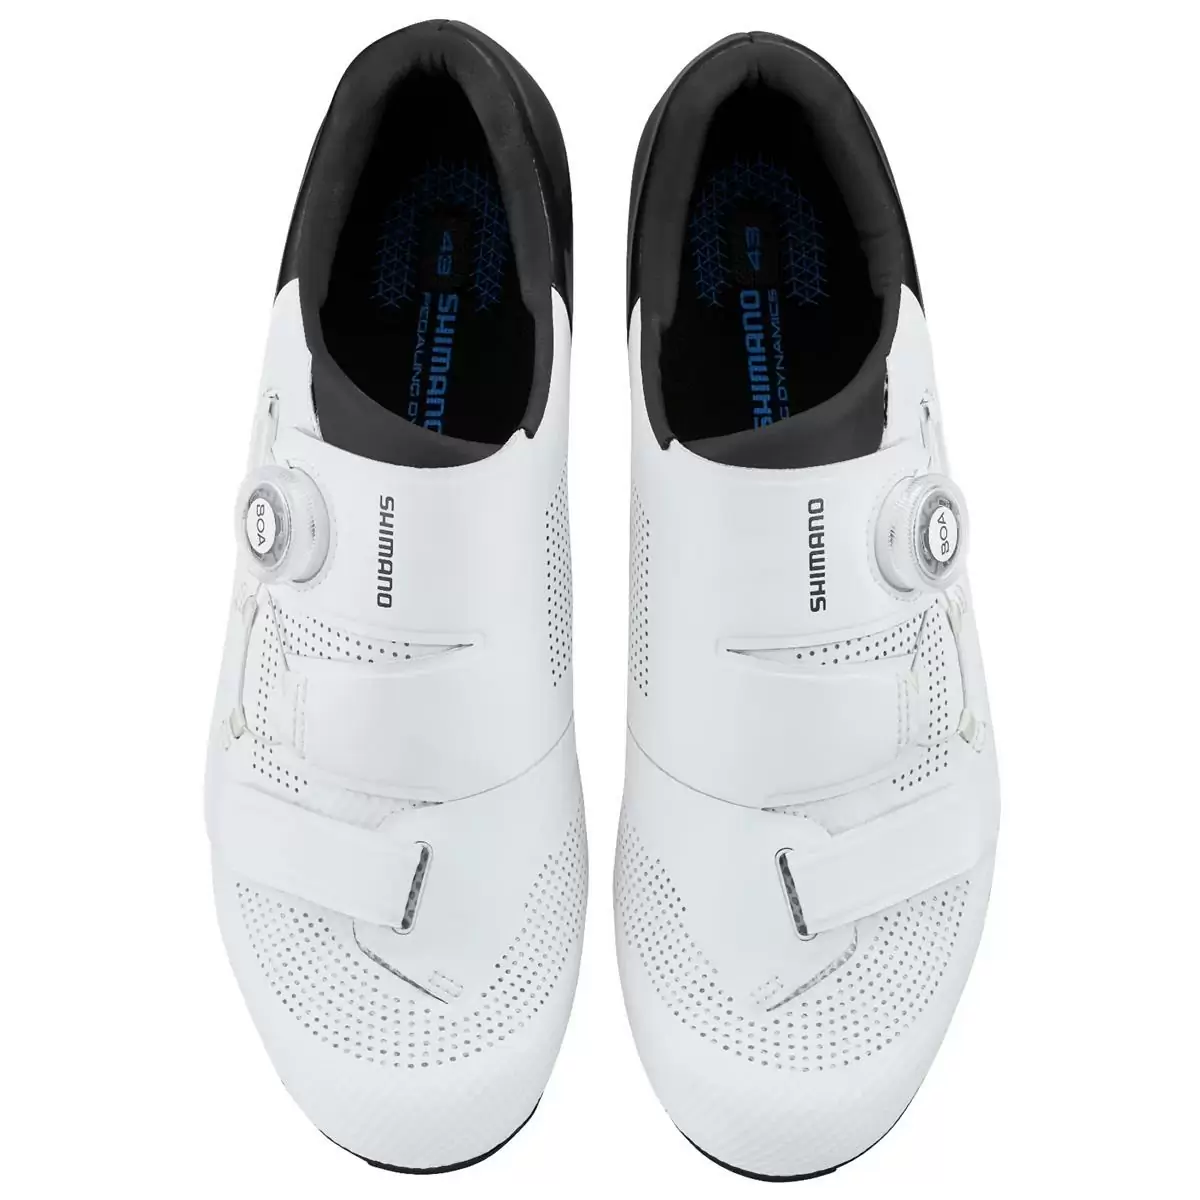 Chaussures route RC SH-RC502 Blanc taille 47 #1